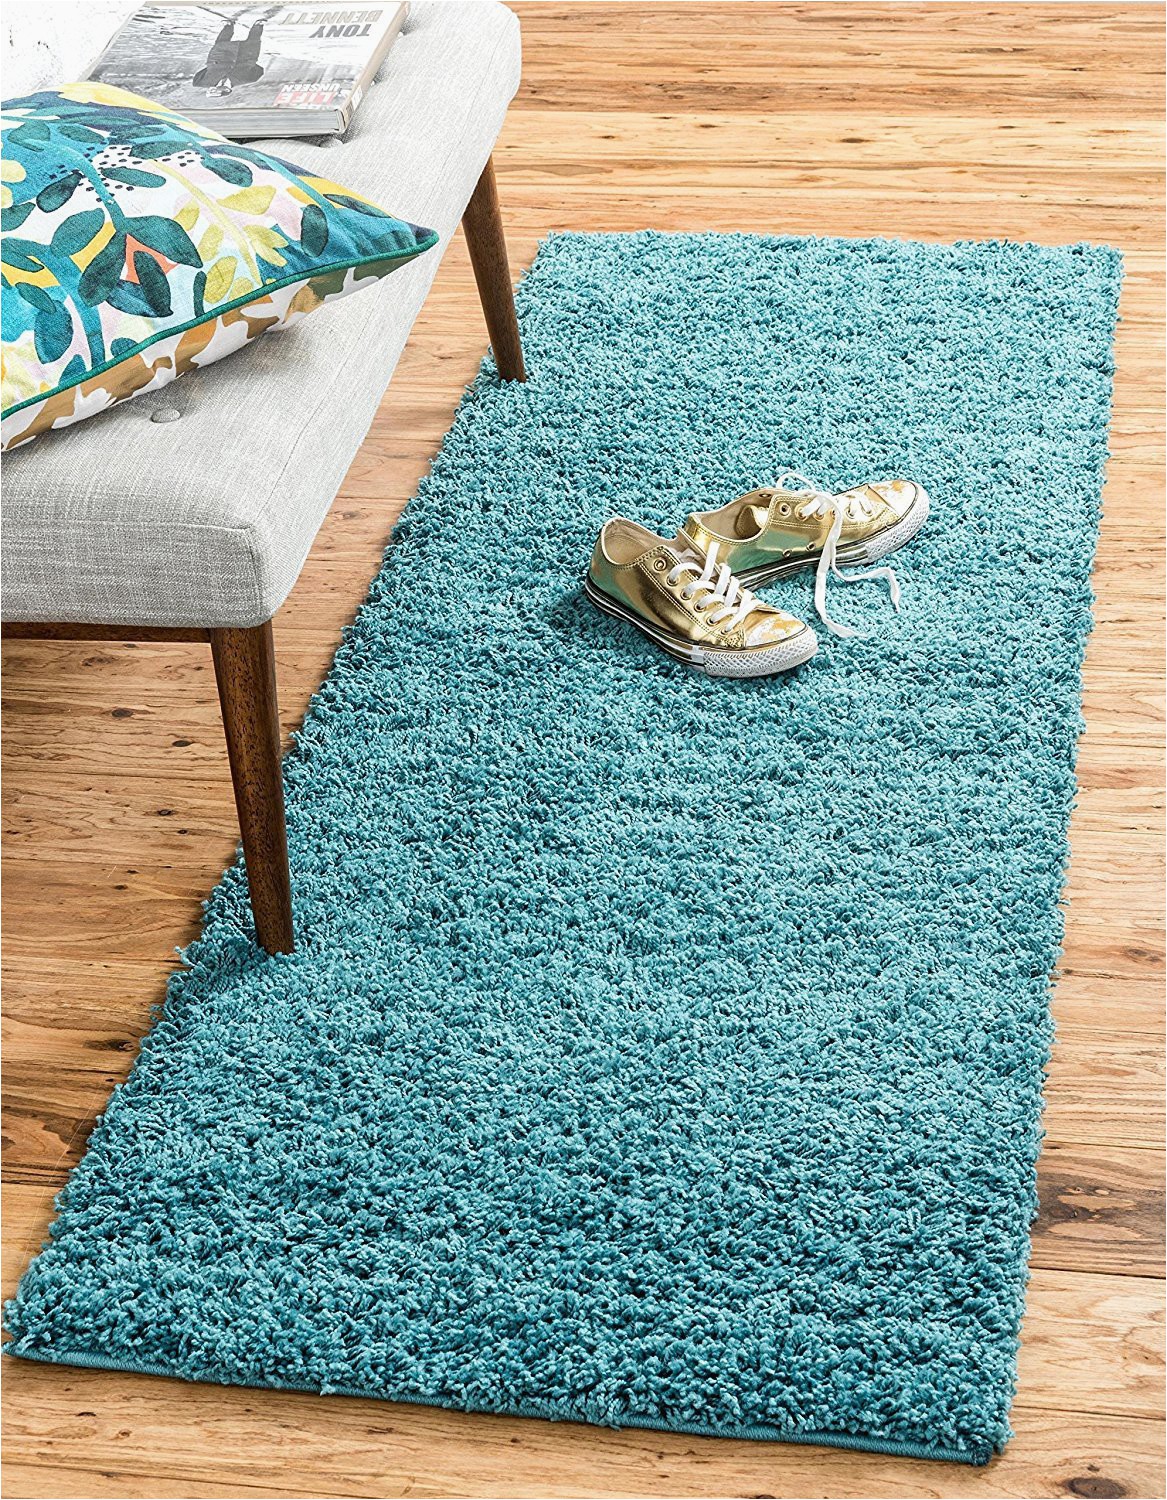 Teal Blue Shaggy Rug Bravich Rugmasters Teal Blue Runner Rug 5 Cm Thick Shag Pile soft Shaggy area Rugs Modern Carpet Living Room Bedroom Mats 60 X 230 Cm 2 3 X 8 0